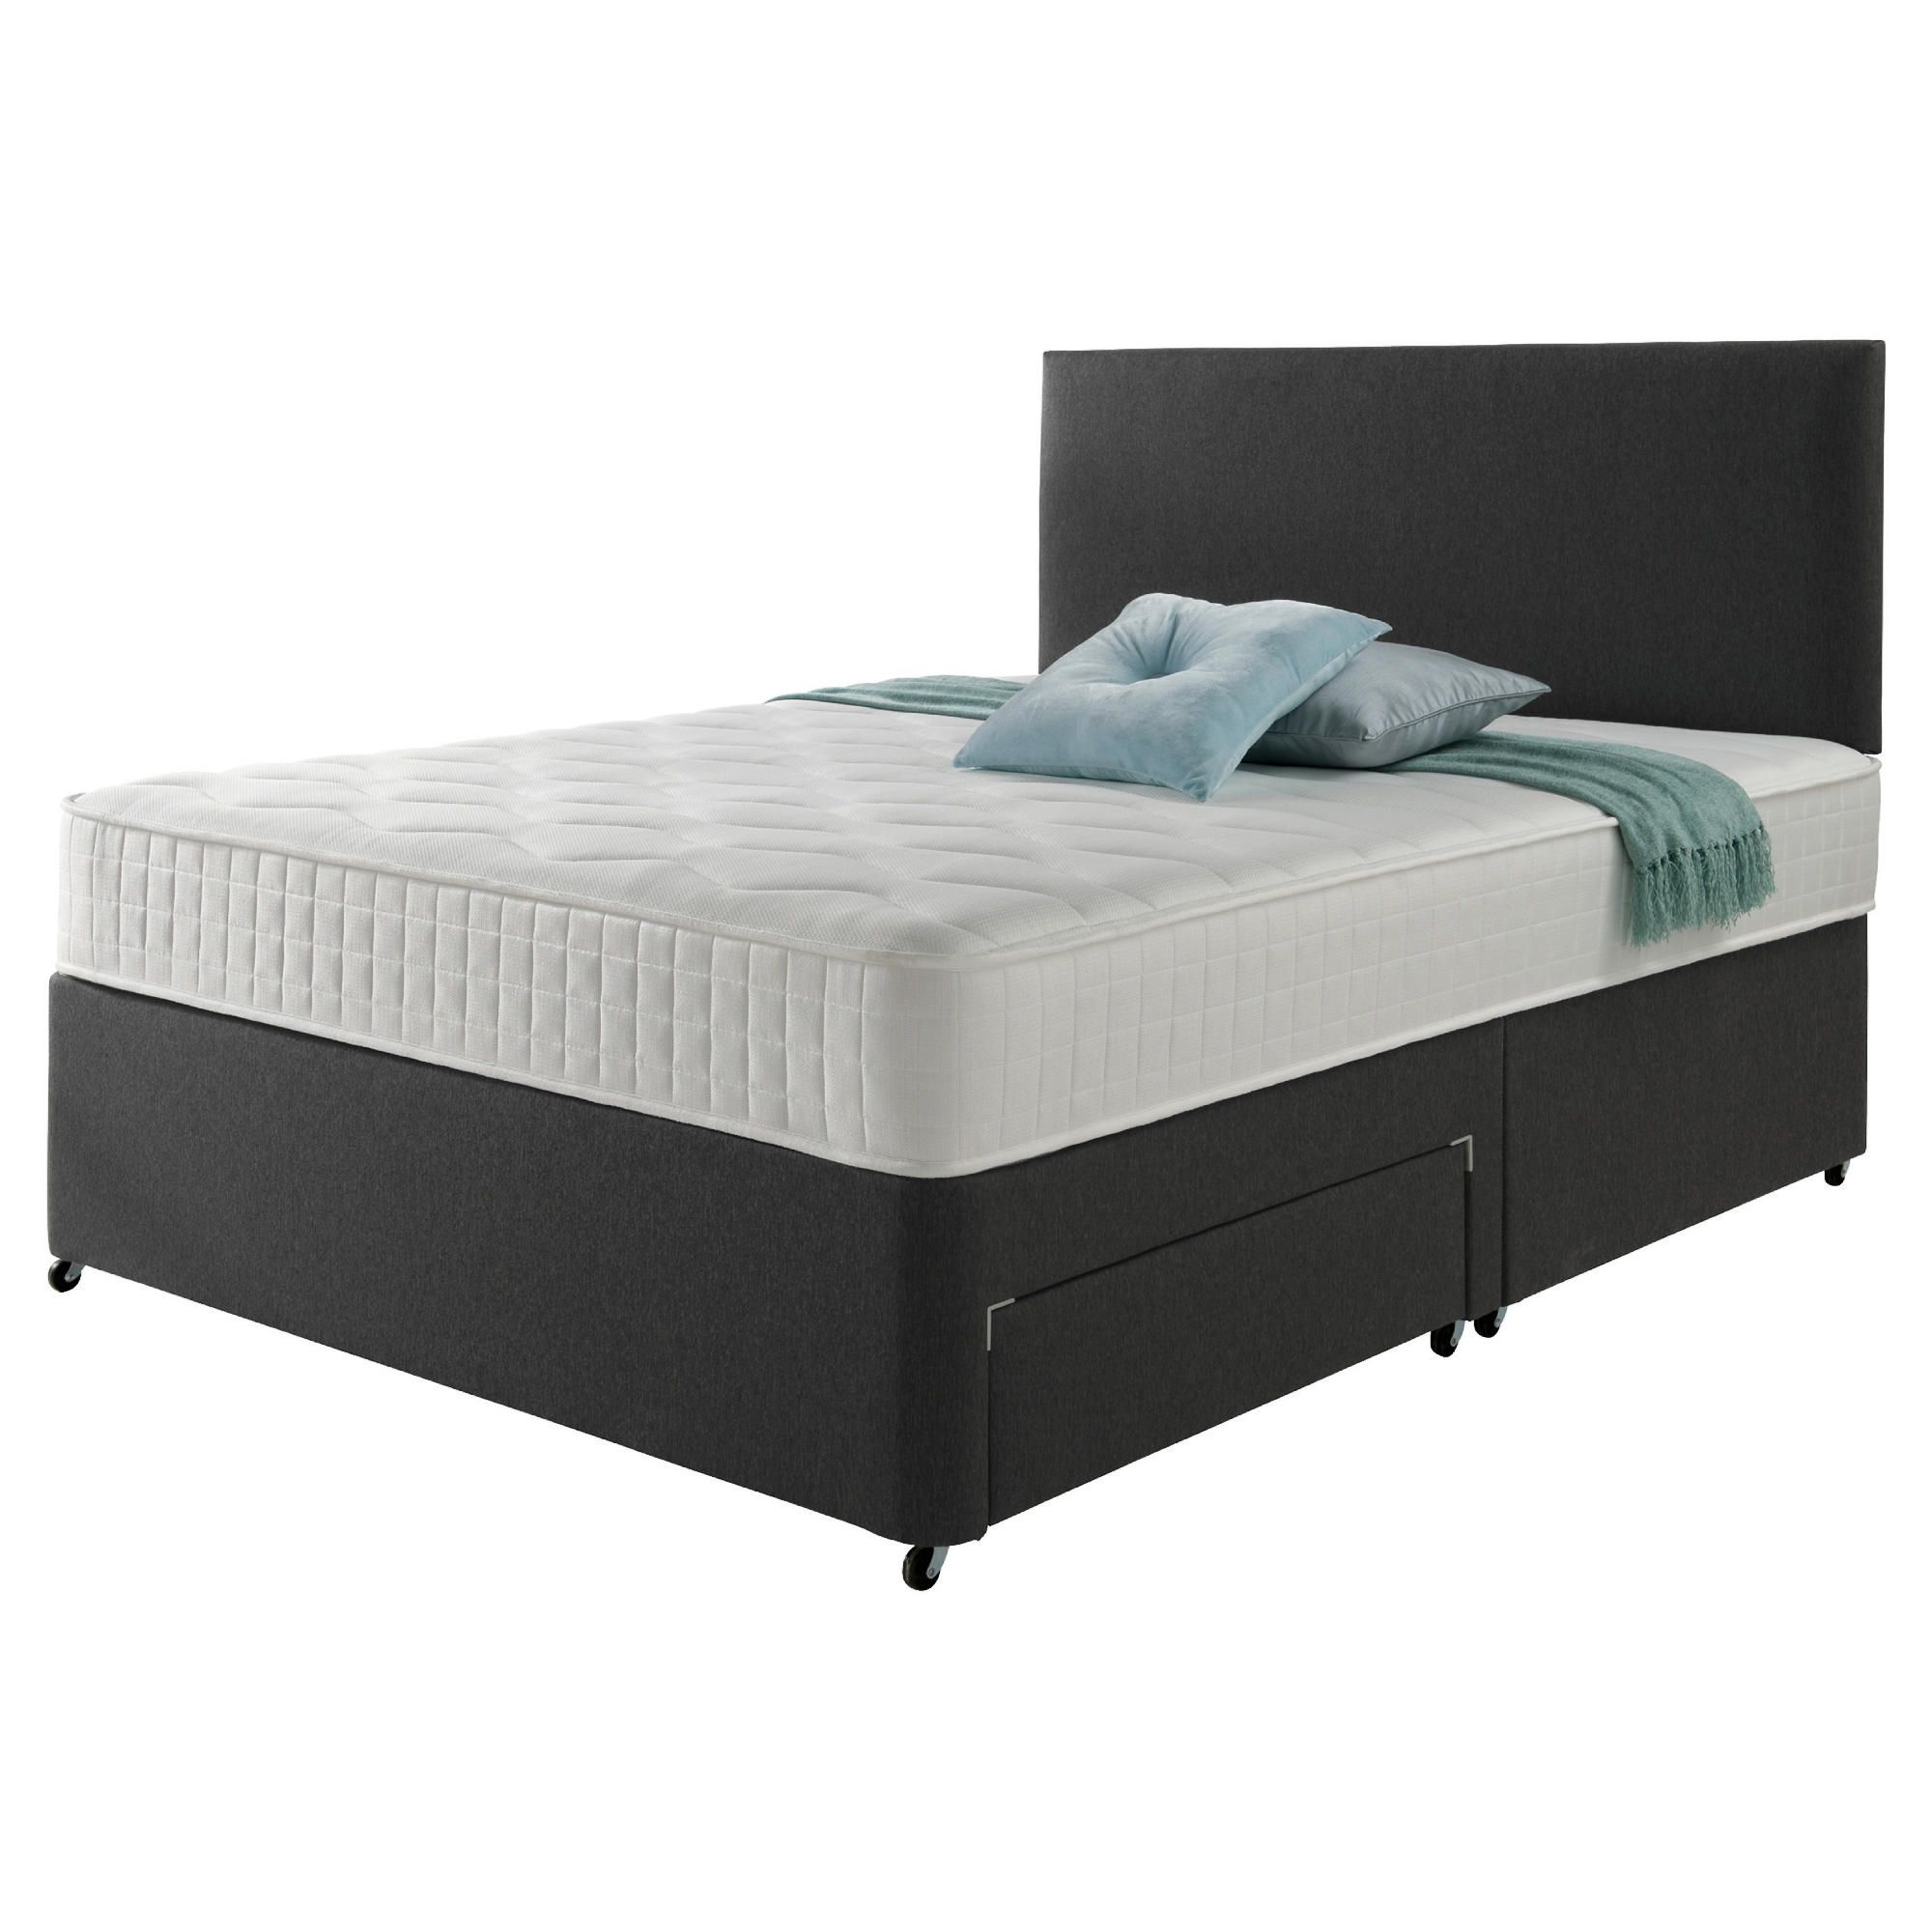 Rest Assured Memory Non Storage Super King Divan and Headboard Charcoal at Tesco Direct